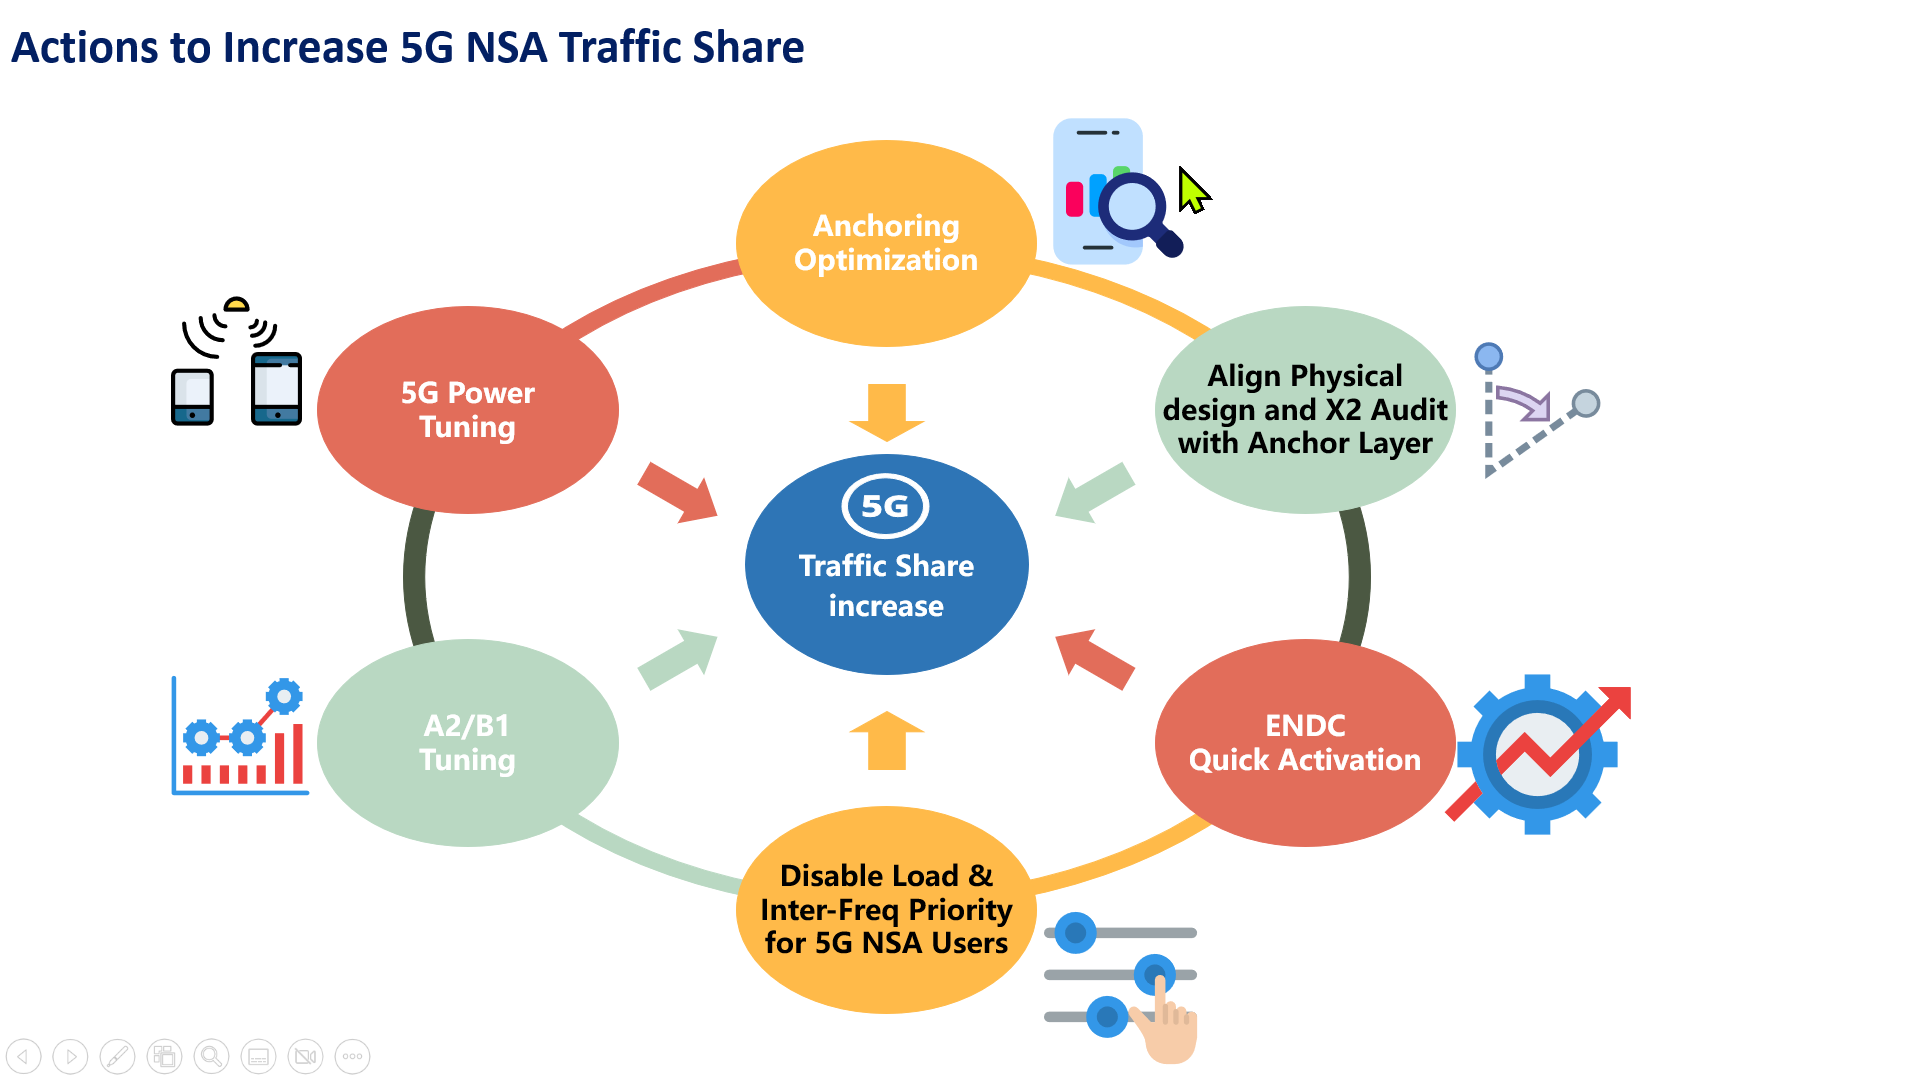 Actions to Increase 5G NSA Traffic Share